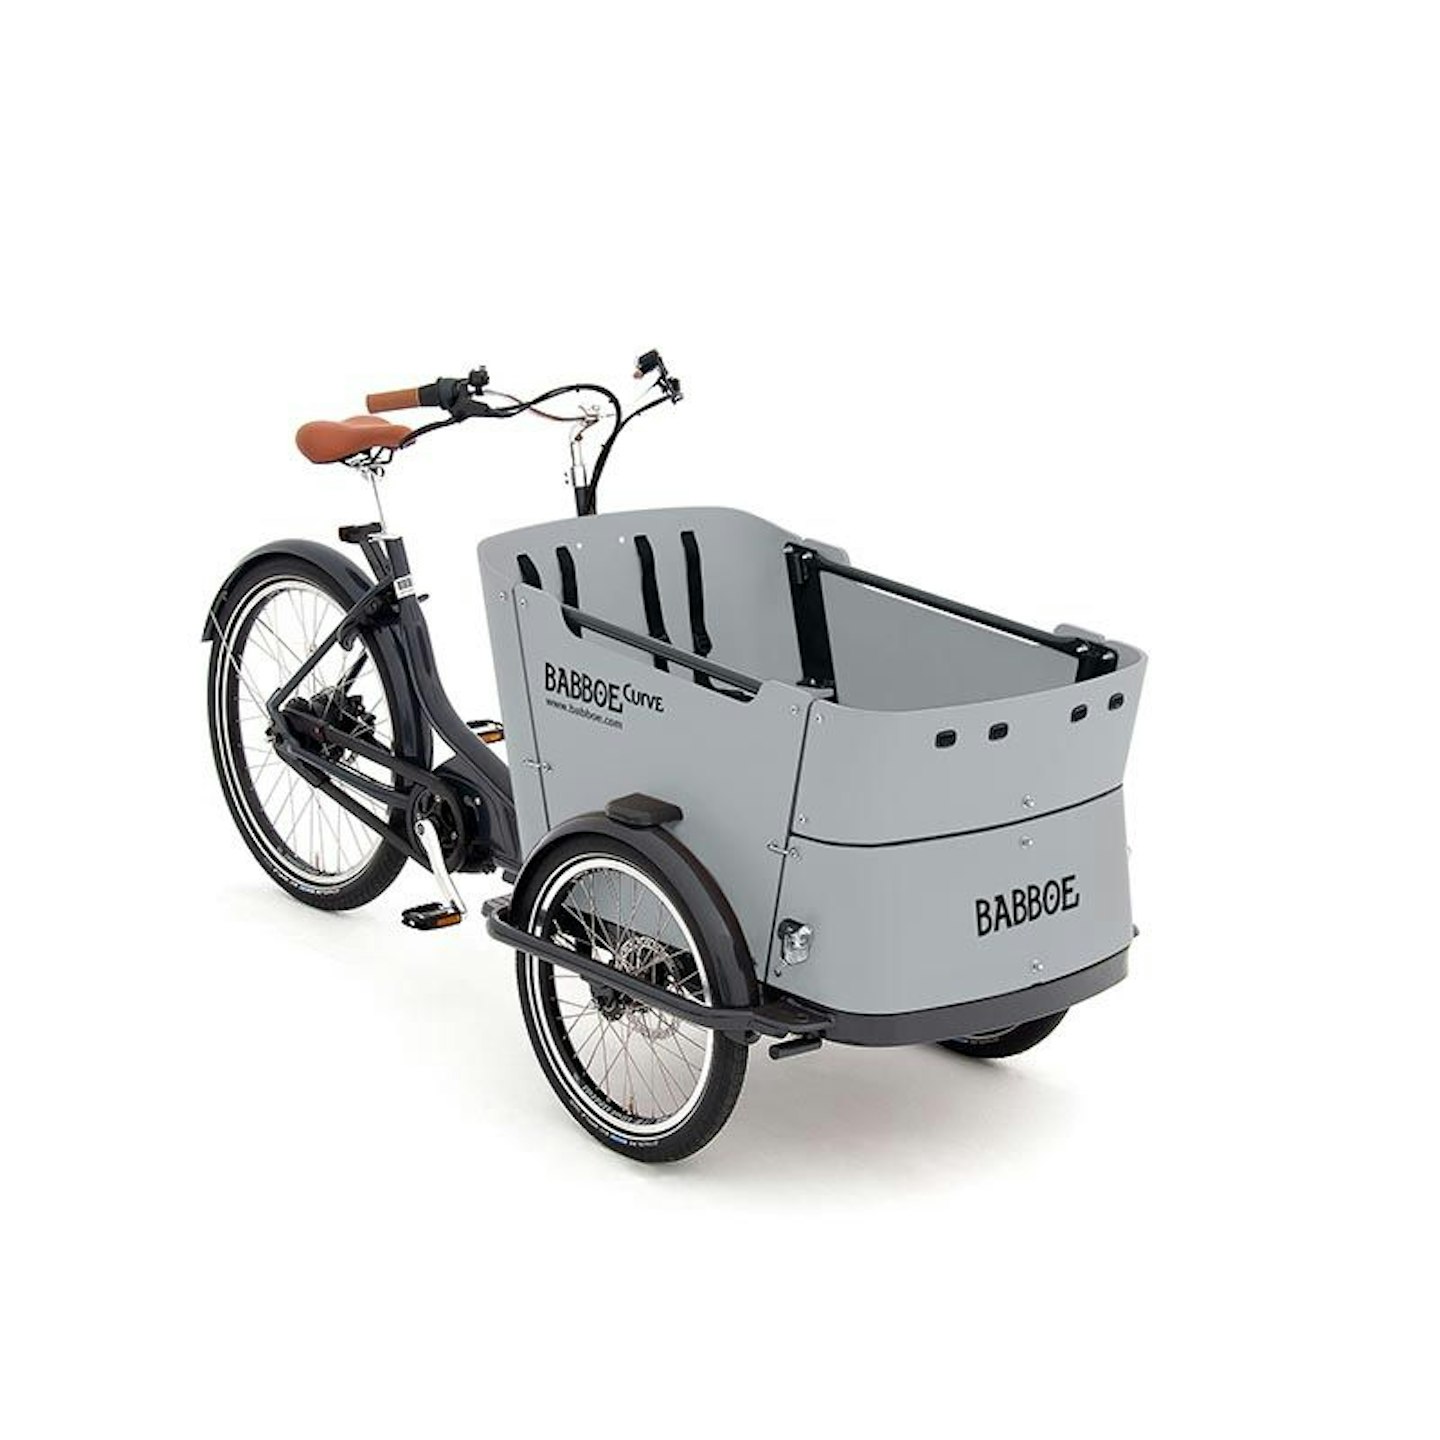 Babboe Curve family trike